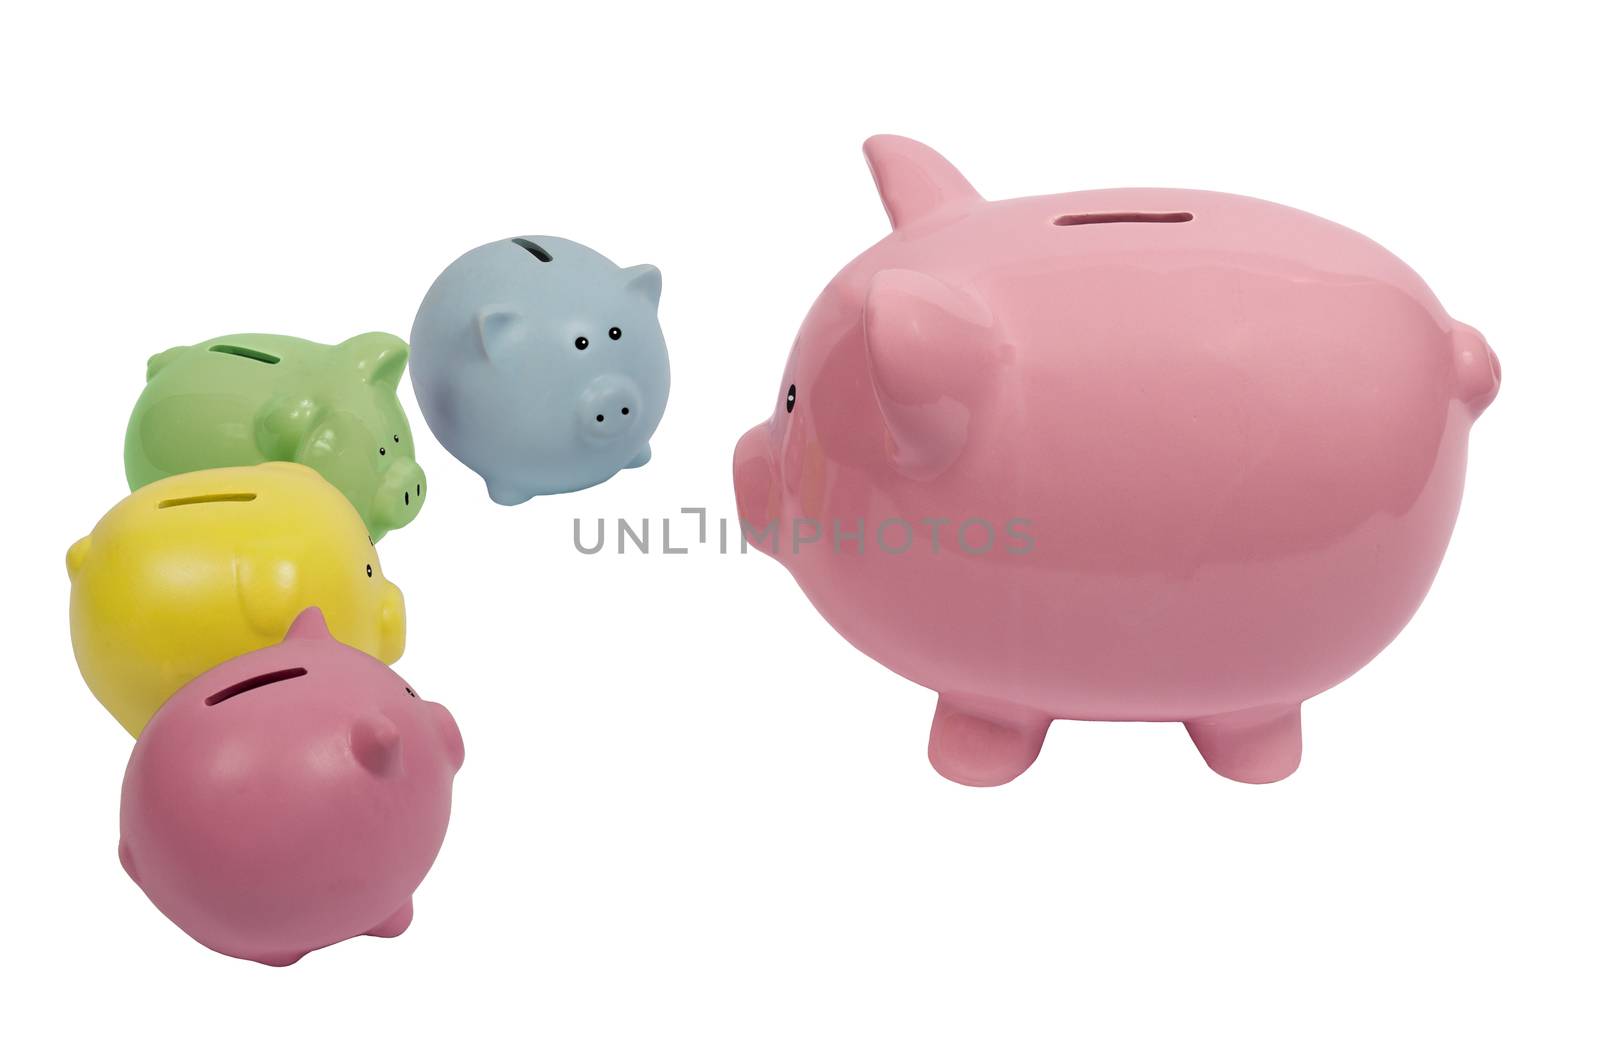 Piggy Bank Parent Discusses Savings With Kids by stockbuster1